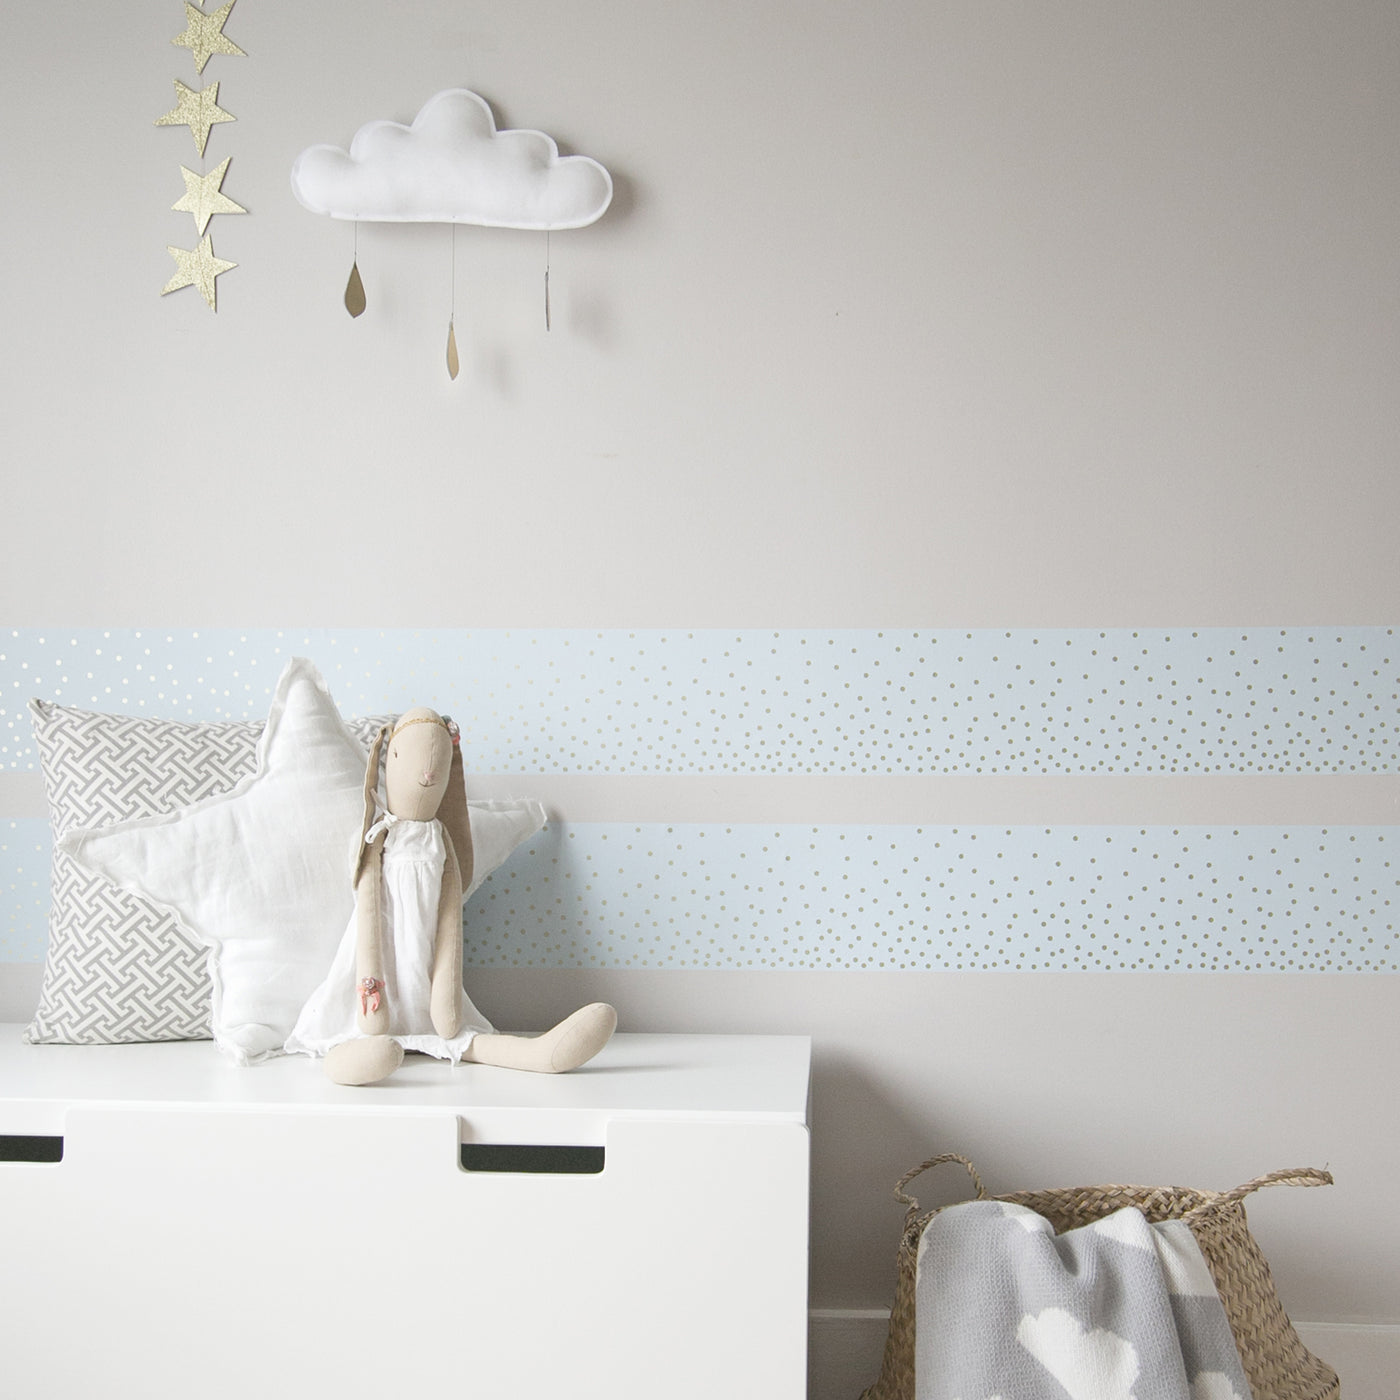 Tempaper's Falling Dots Border Peel And Stick Wallpaper shown above a chest behind a doll and pillows.